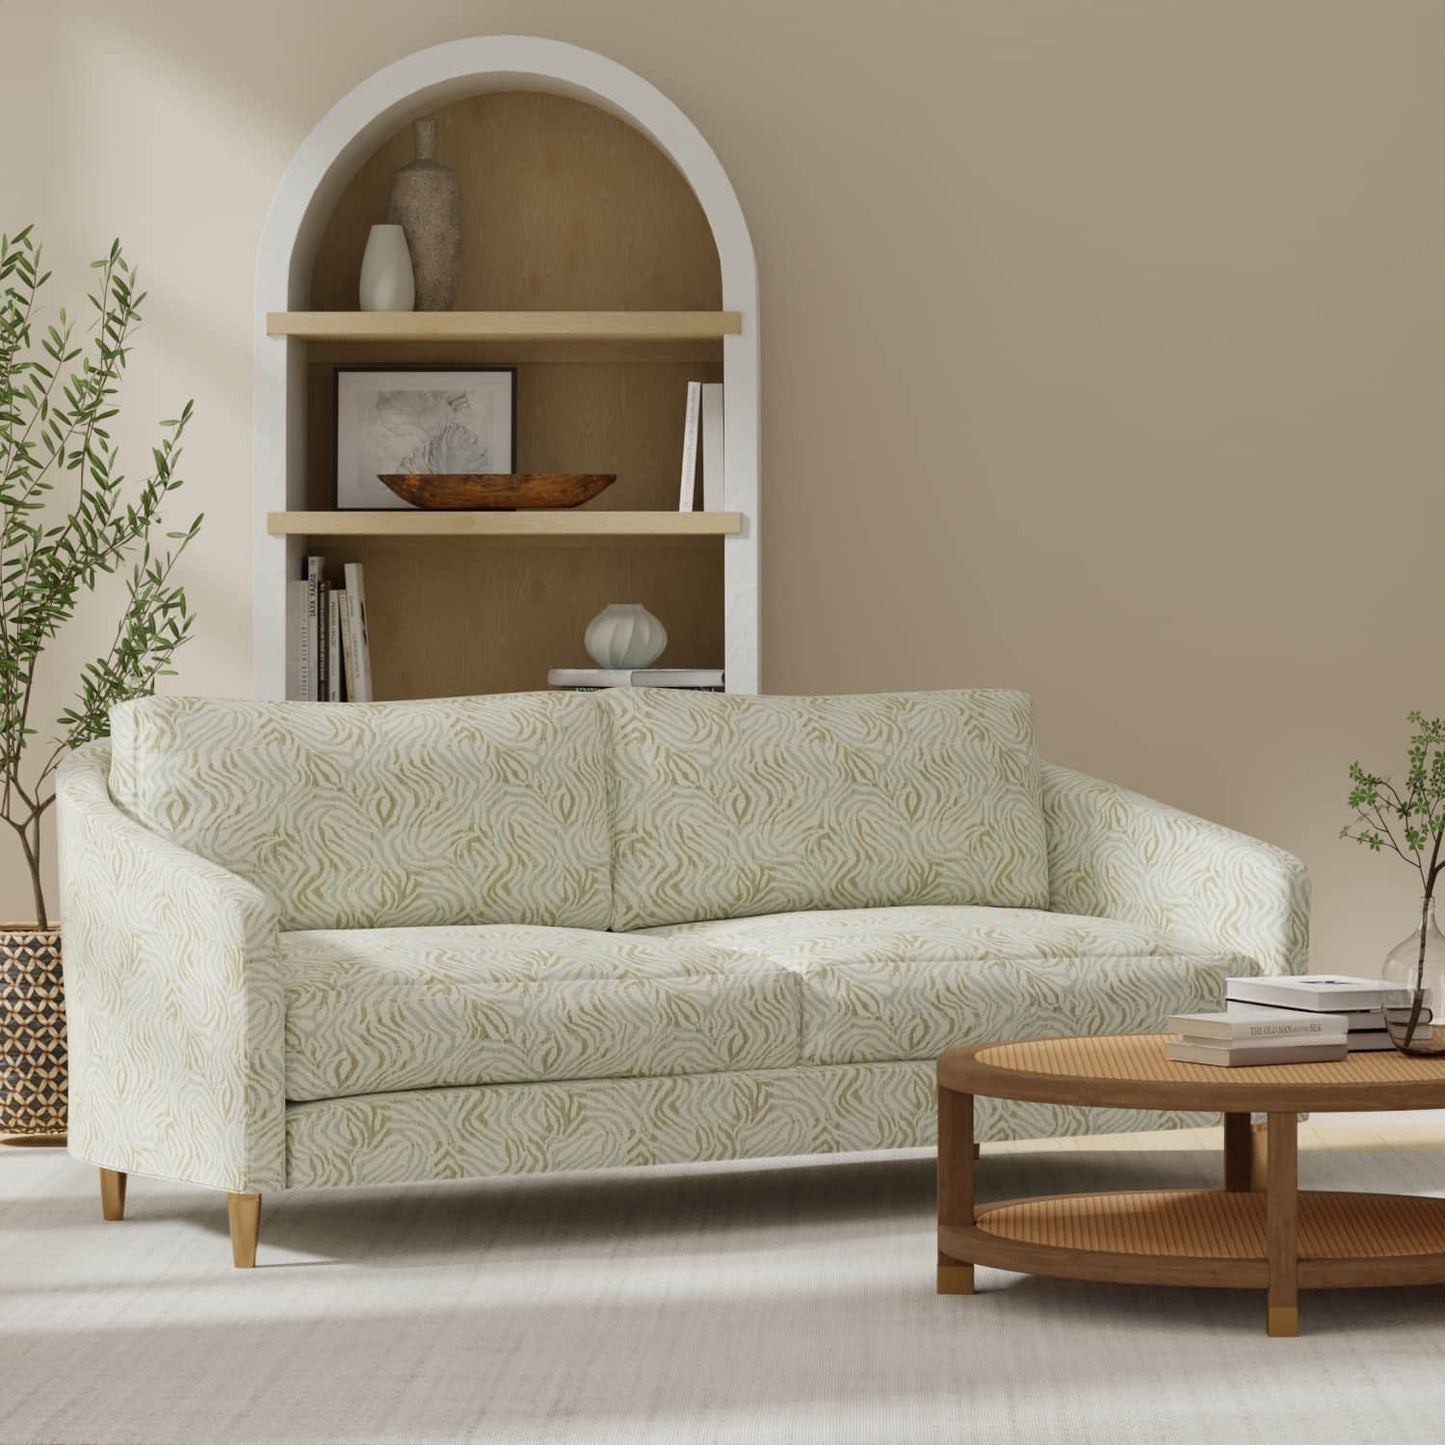 Abel Spring upholstered on a couch